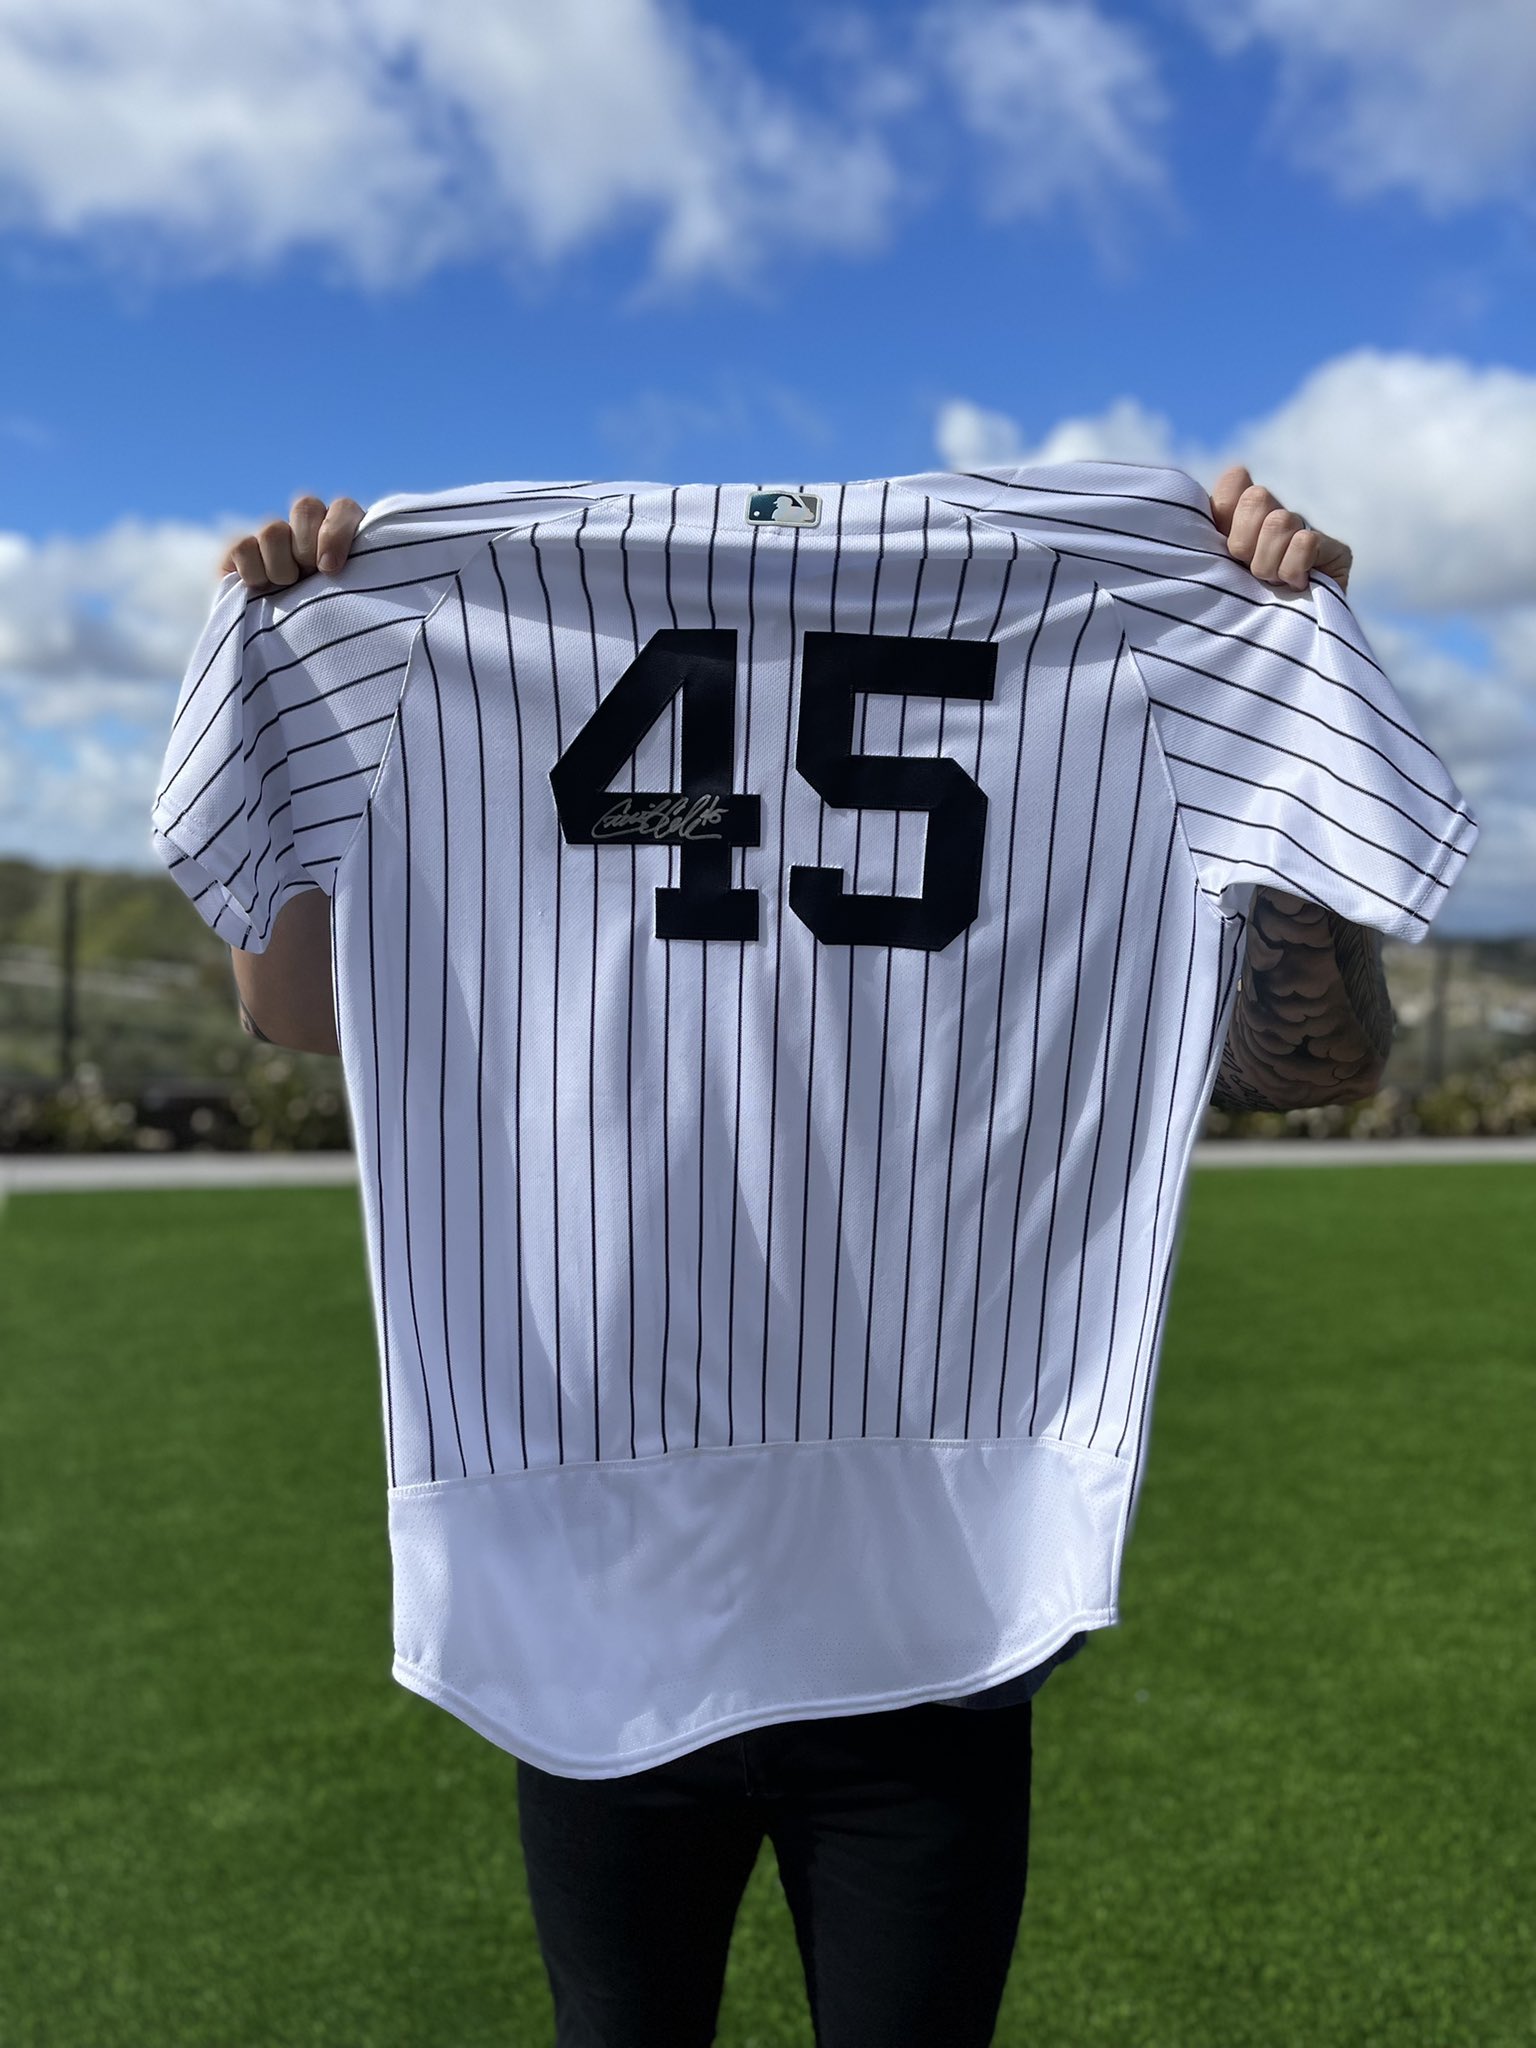 Trevor Williams on X: 1) by making a minimum $34 donation through our  website ( you are automatically entered to win a  signed Gerrit Cole jersey. Contest ends 3/6 at midnight est